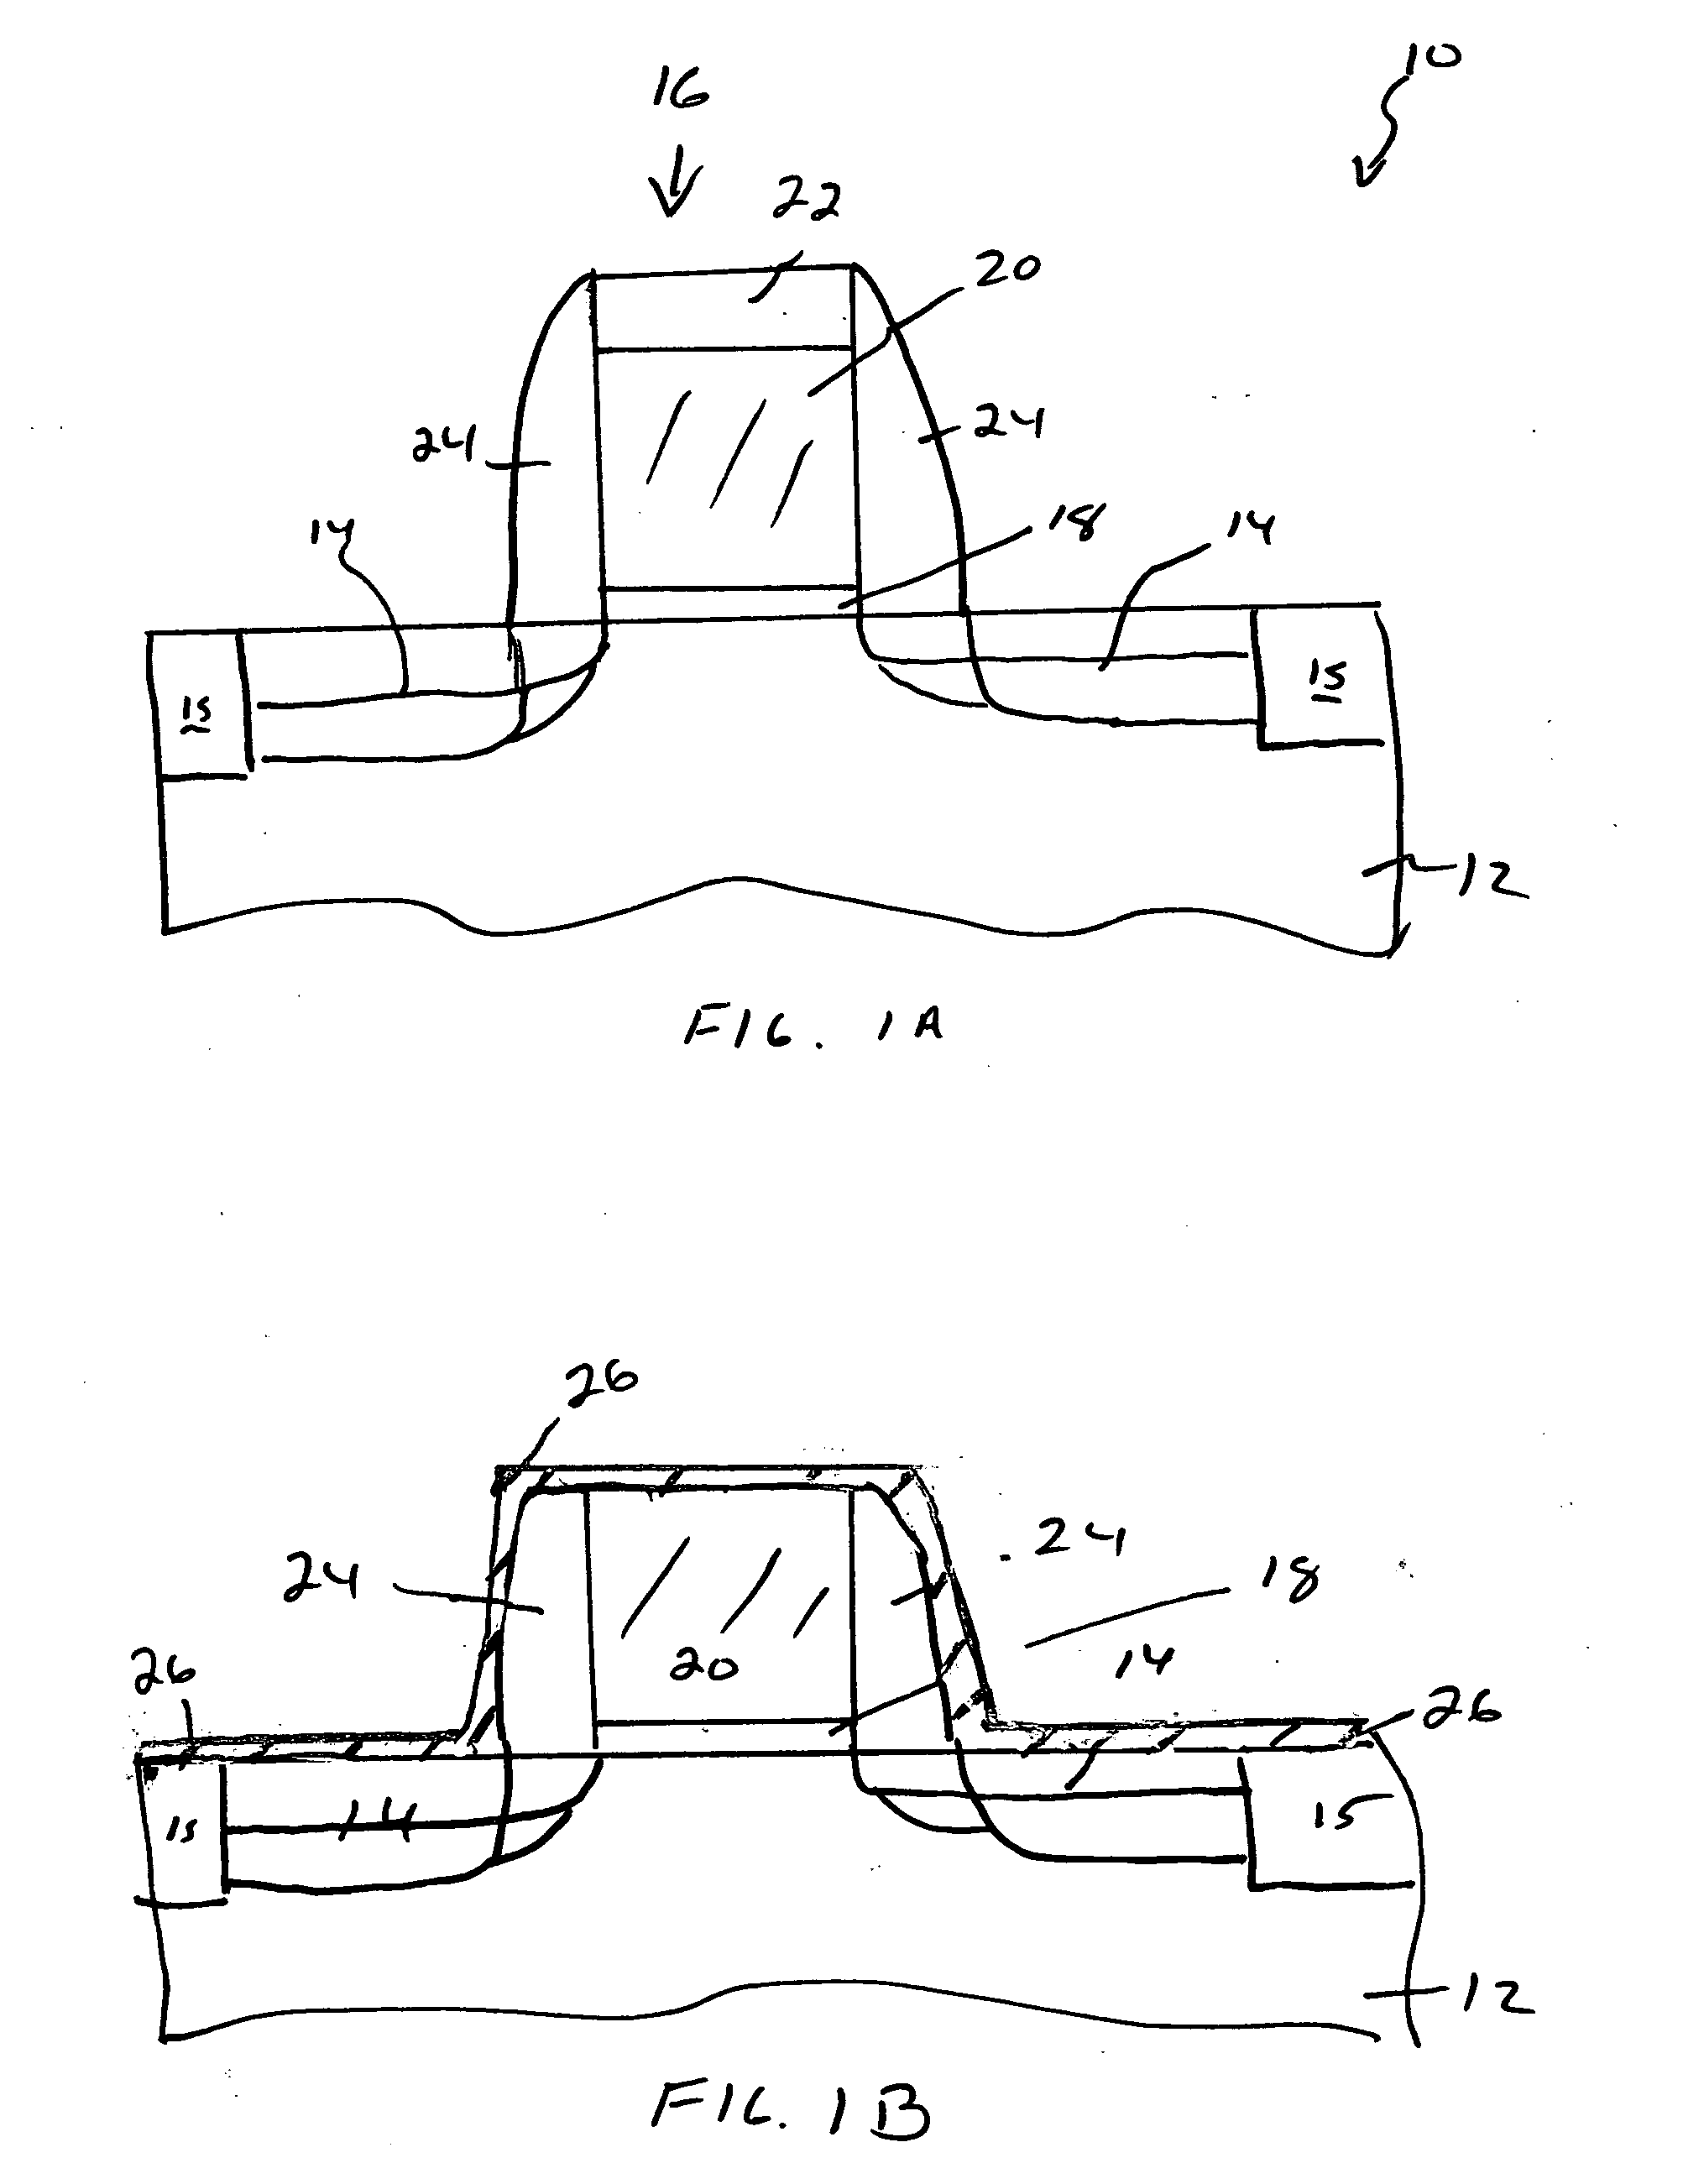 Method and process for forming a self-aligned silicide contact